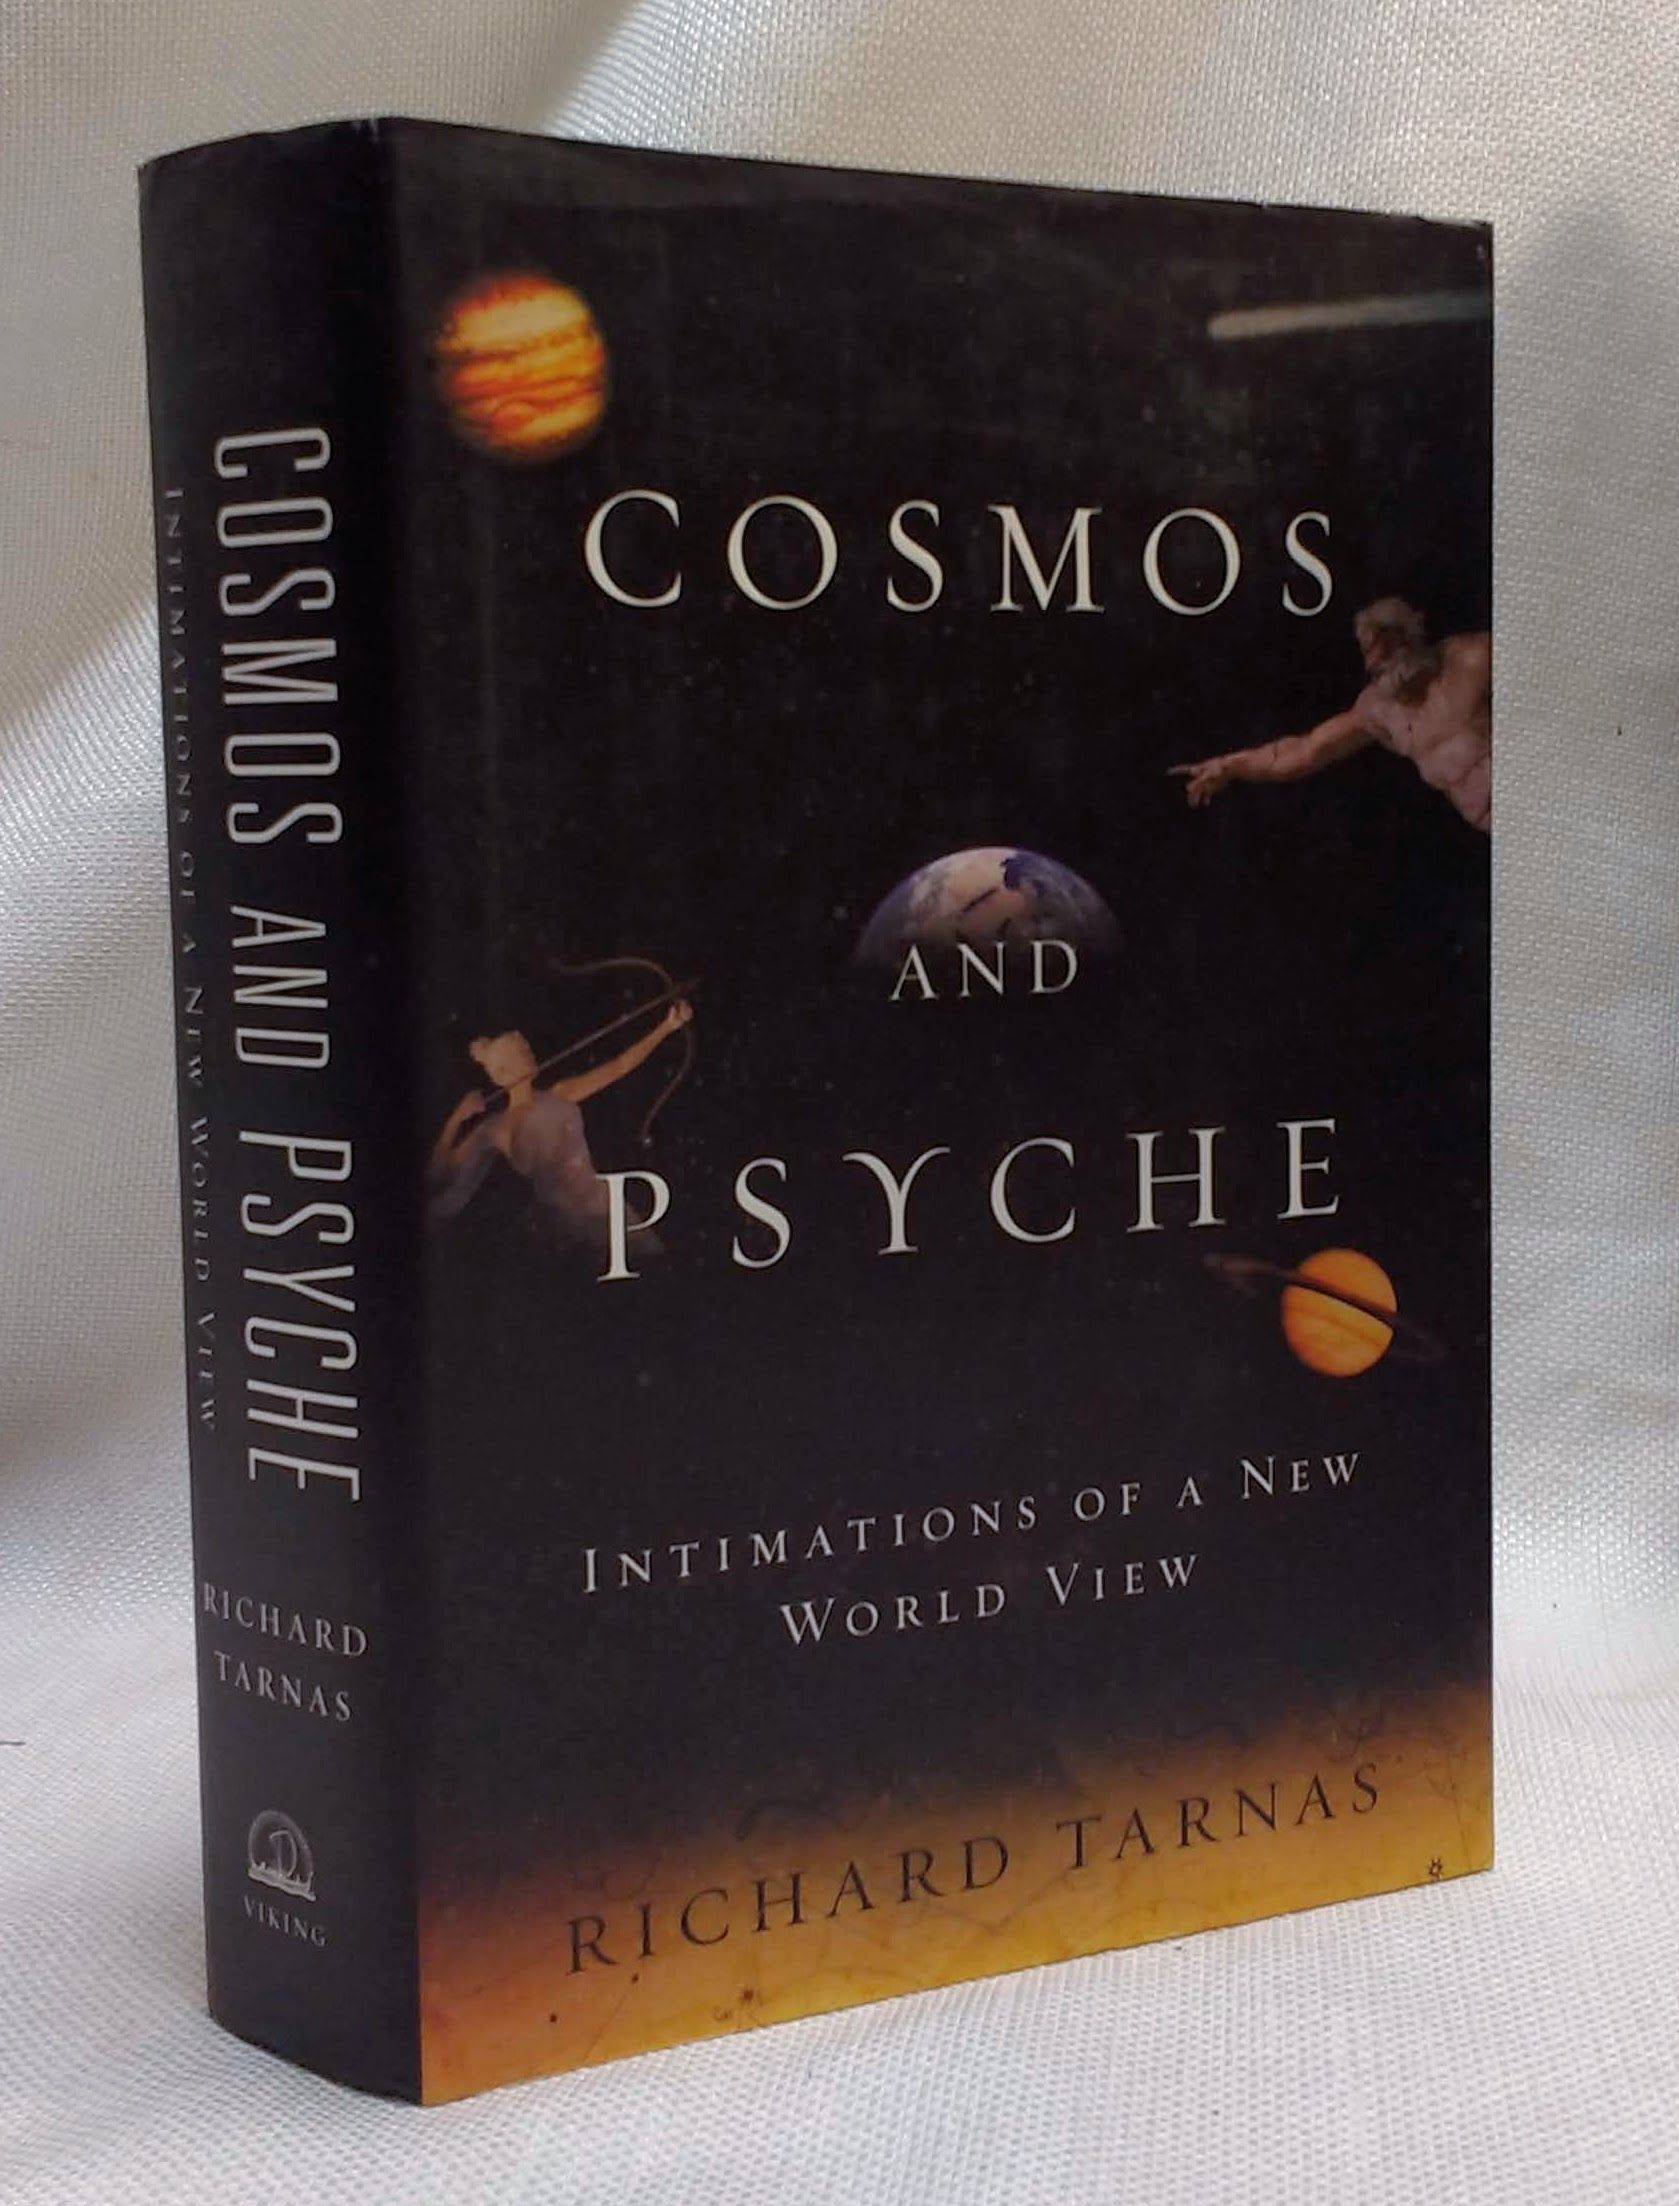 Cosmos & Psyche: Intimations of a New World View